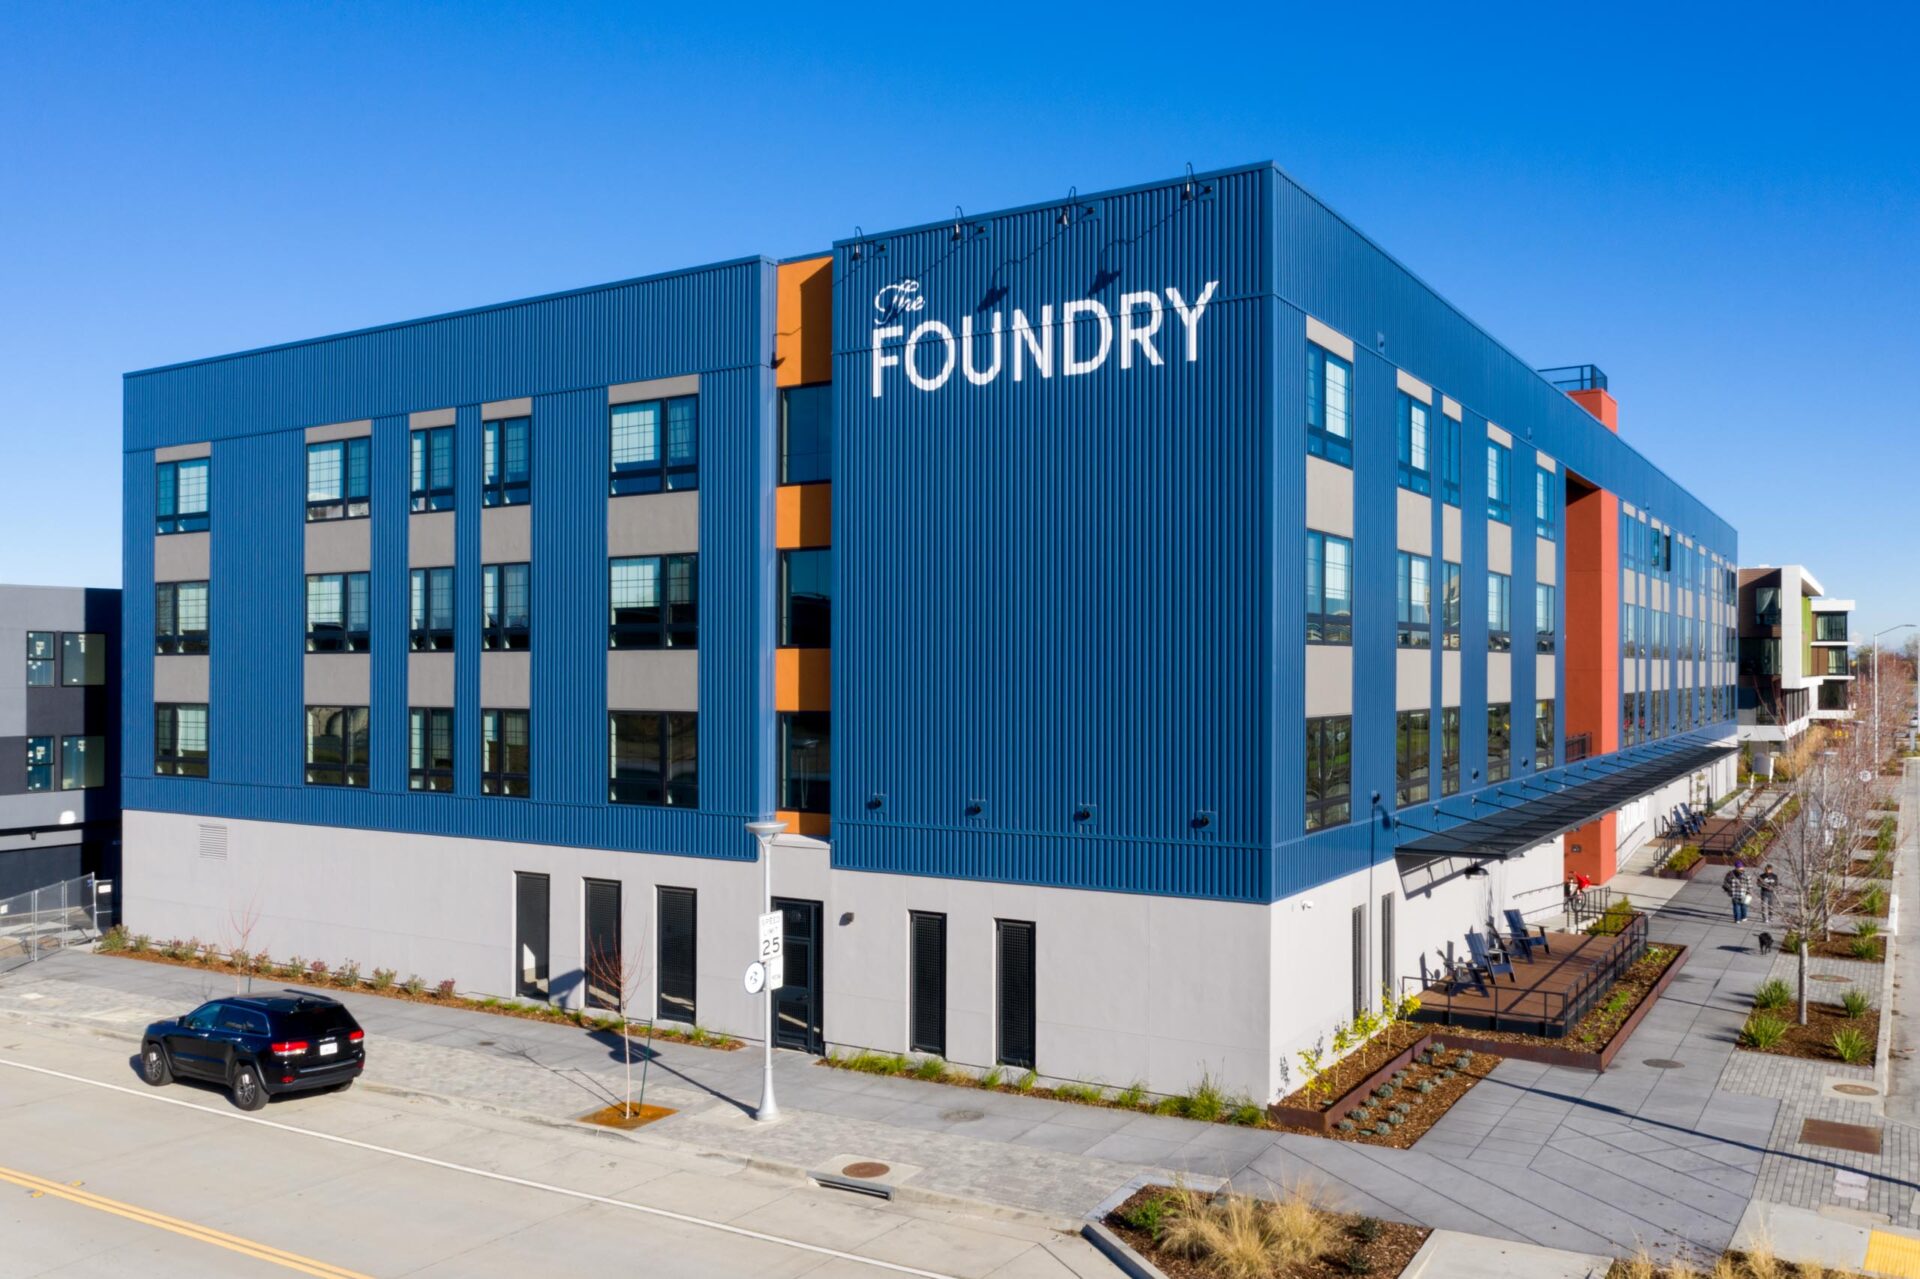 The Foundry - Fulcrum Property.